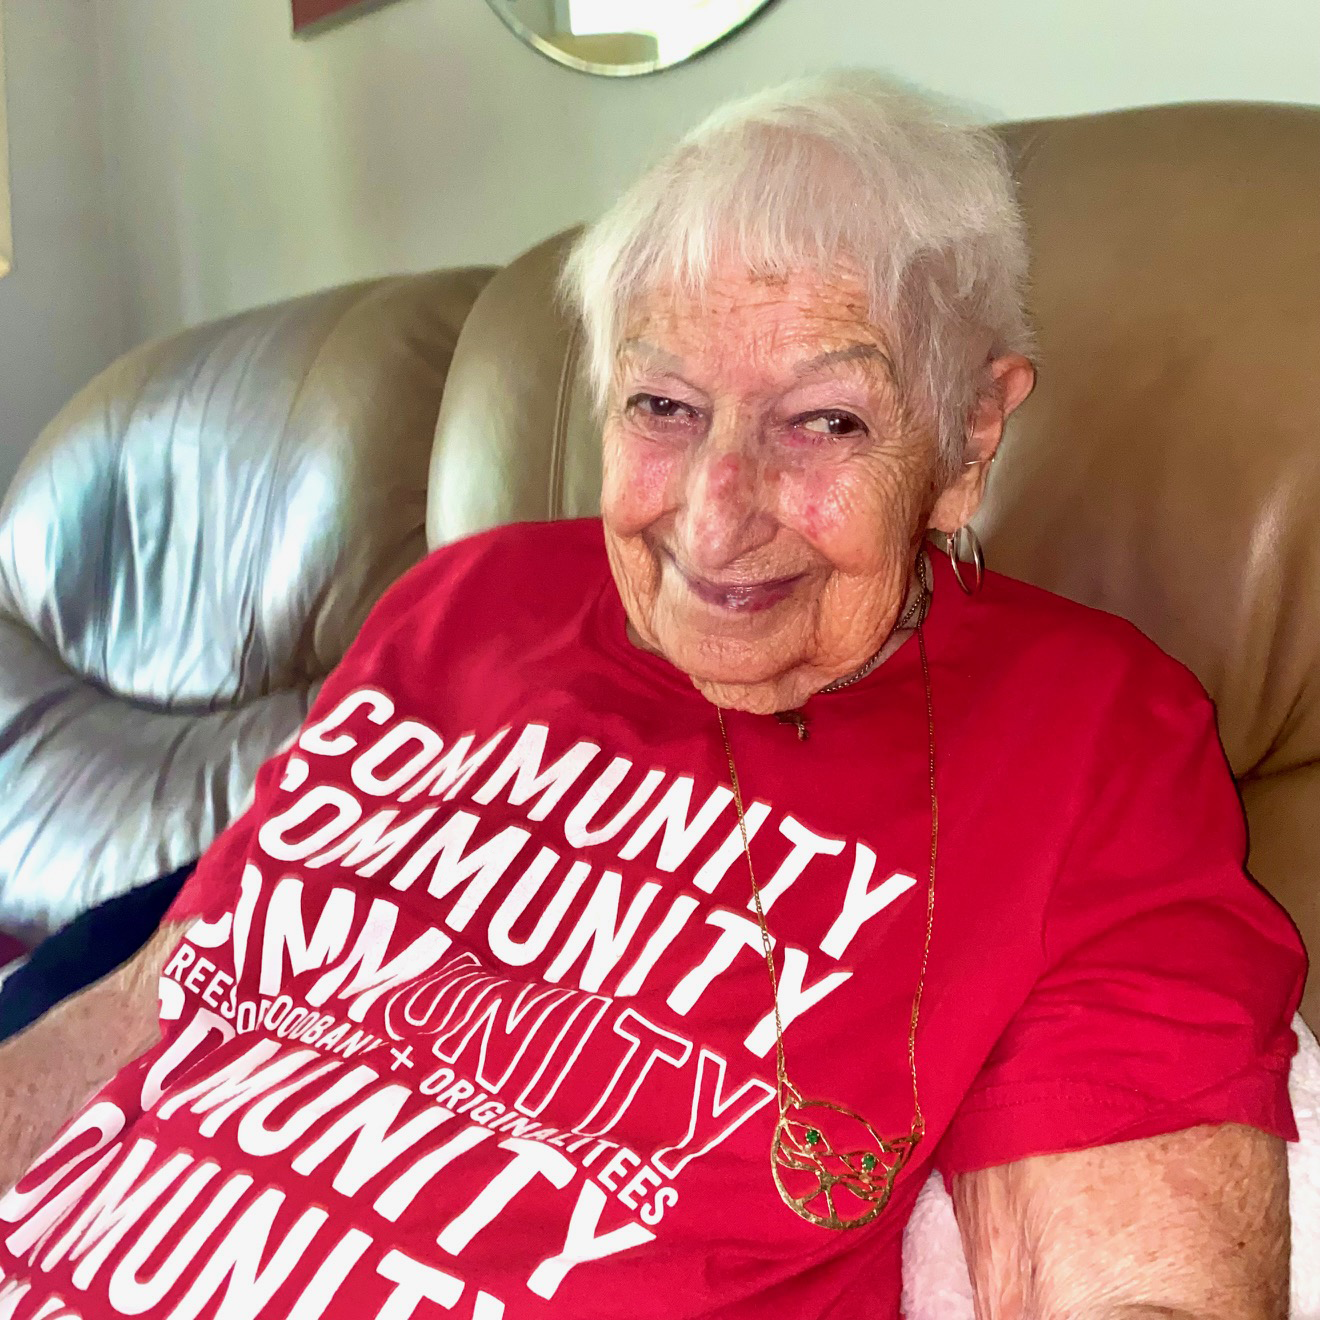 K’vod Connect Fights Senior Isolation with Compassion and Respect